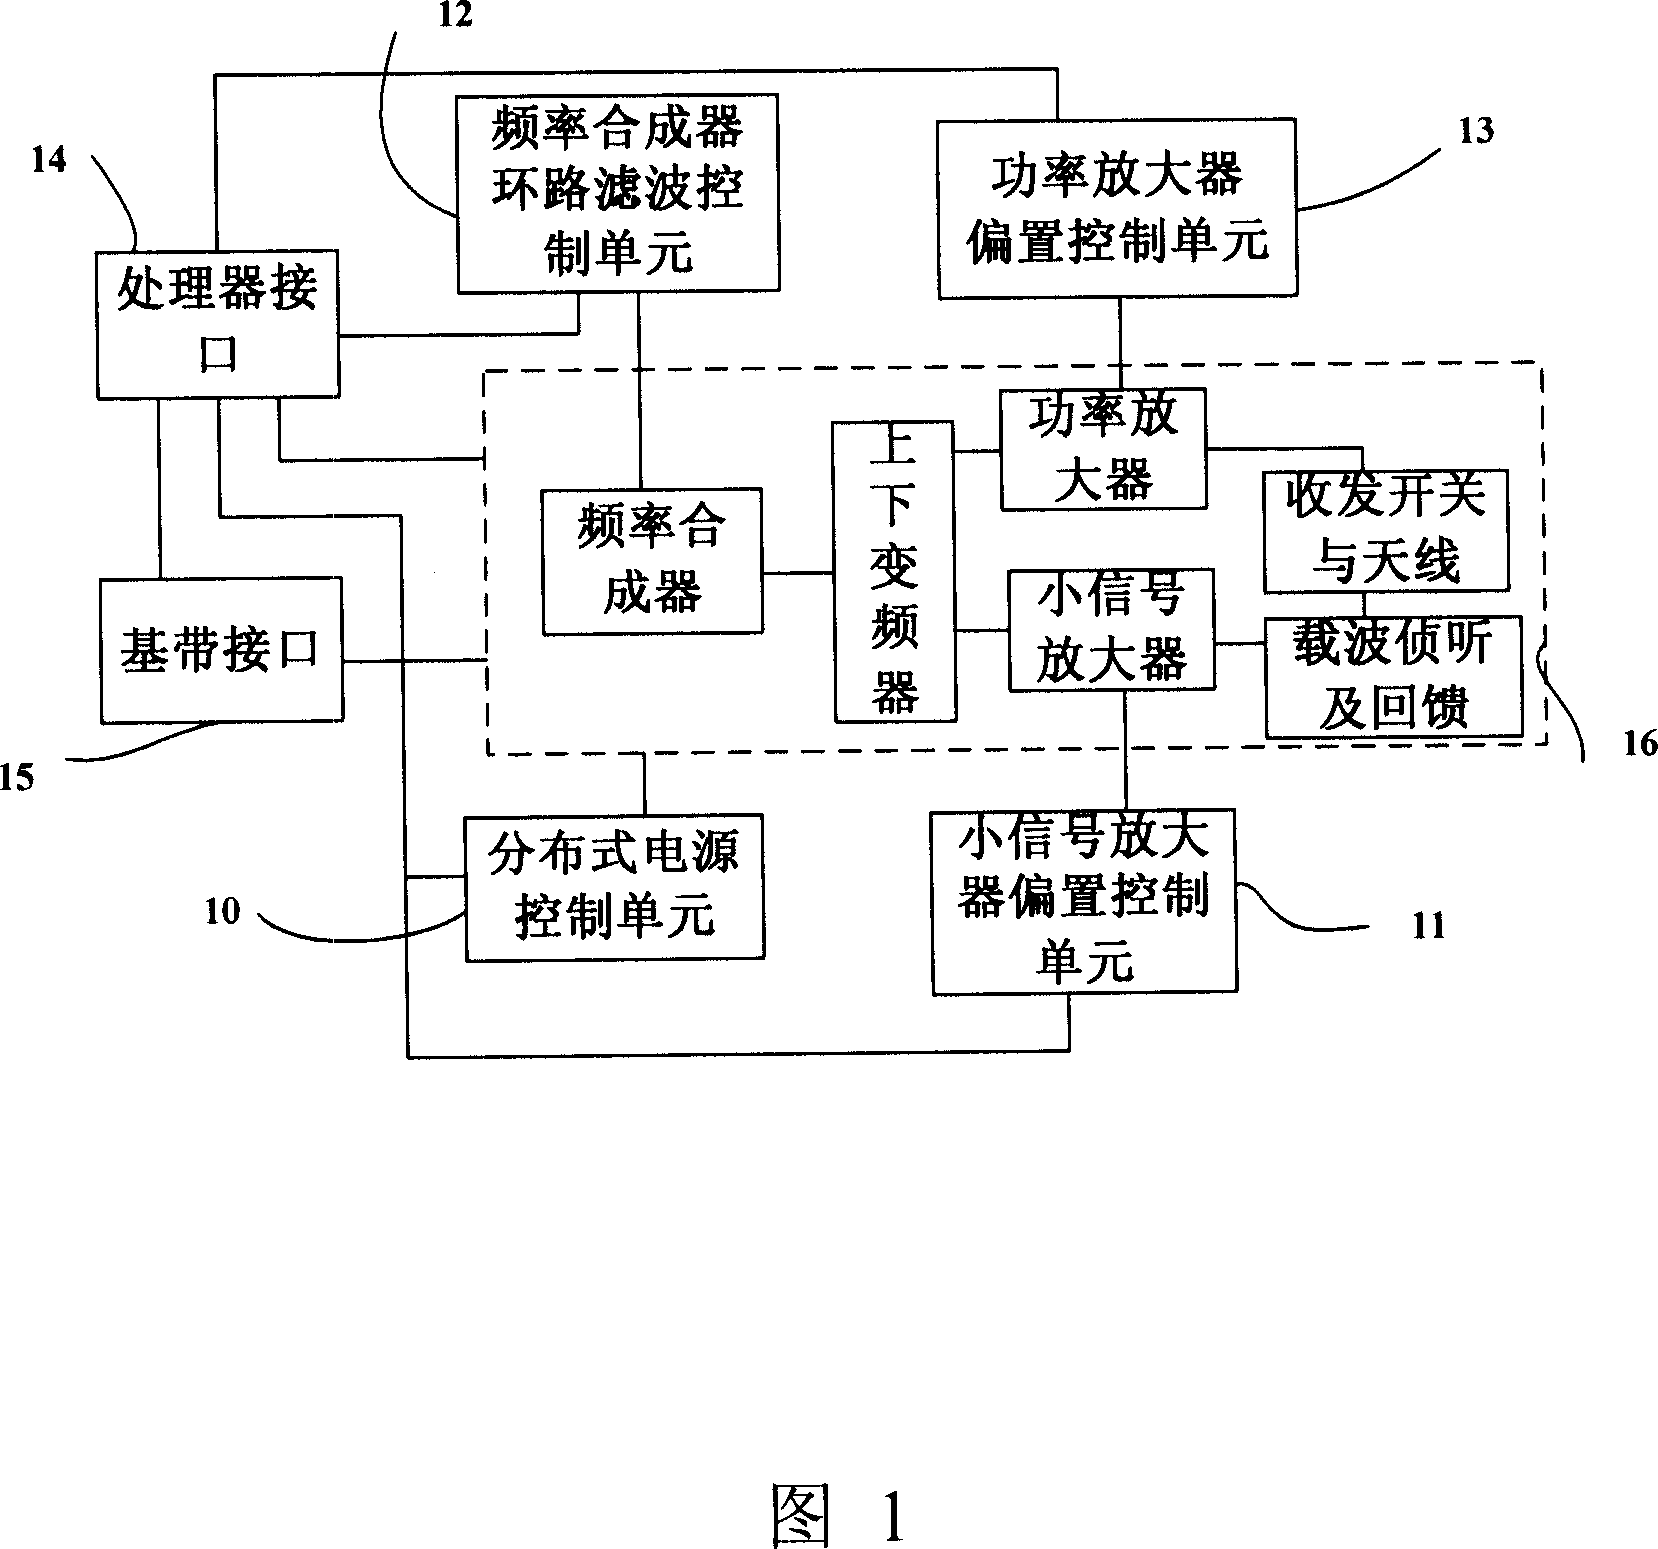 Radio frequency head end device for wireless sensor network node application